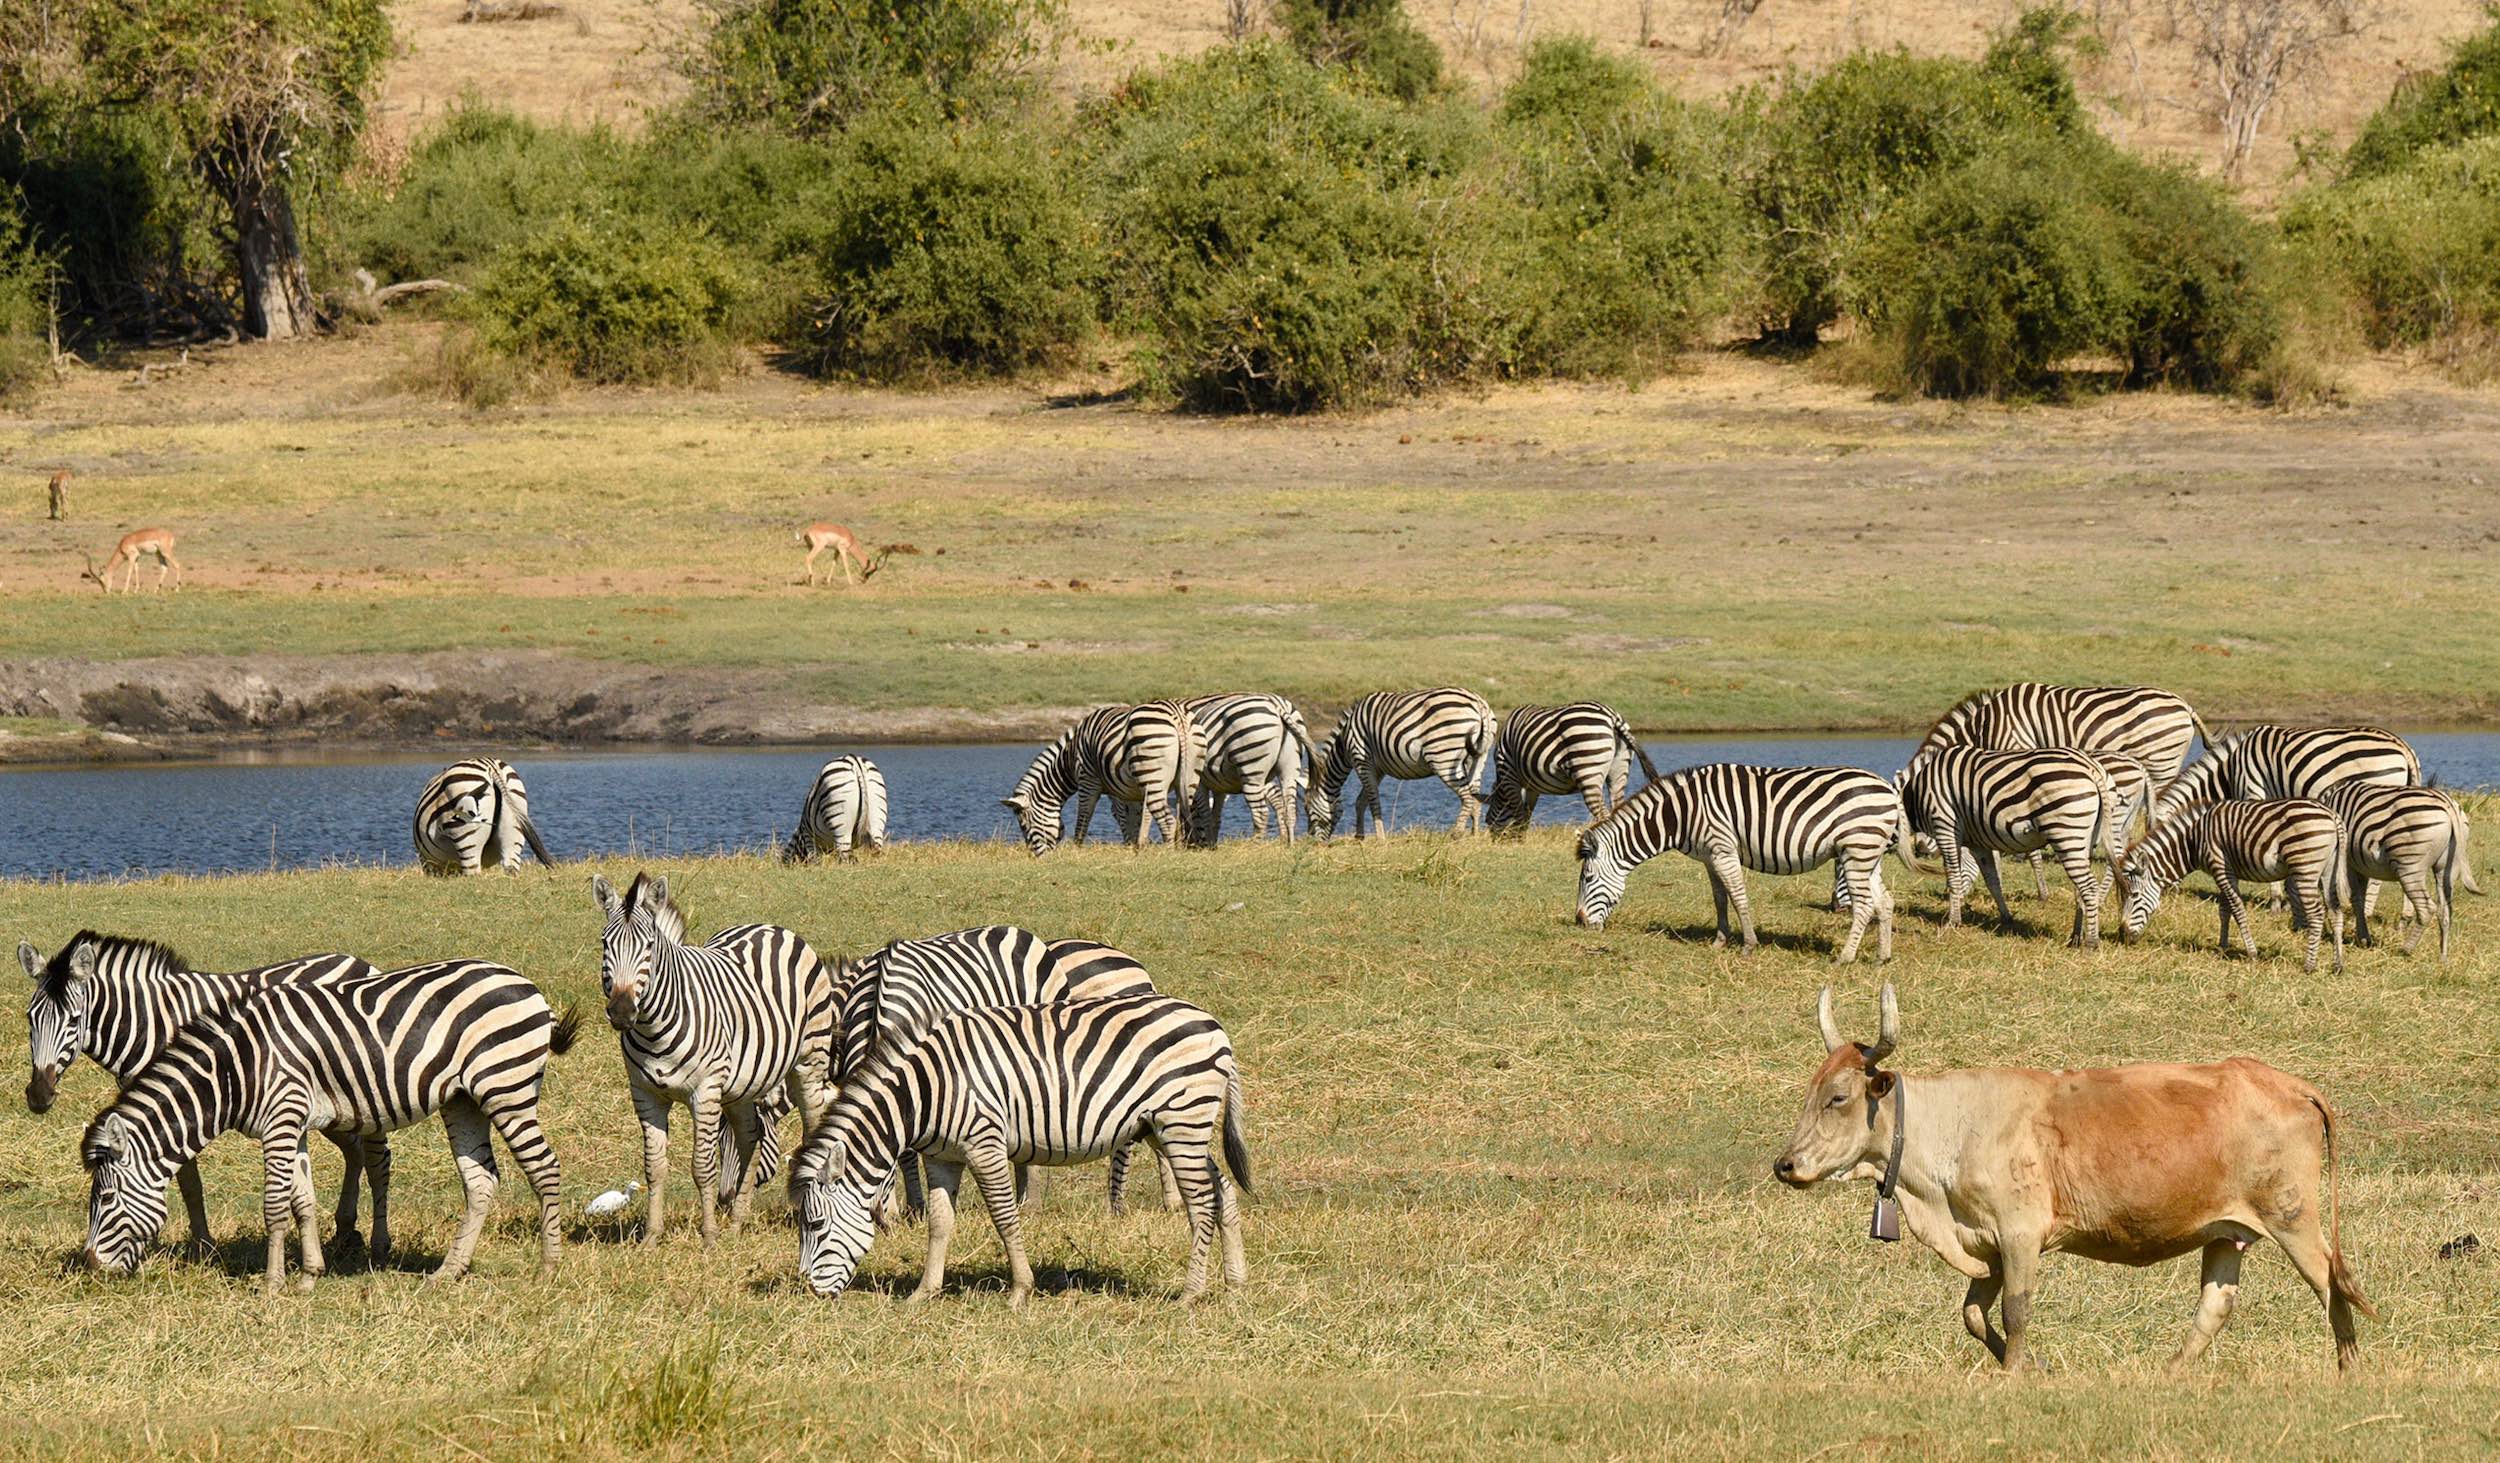 A group of zebra graze next to a river while a cow wanders through them.